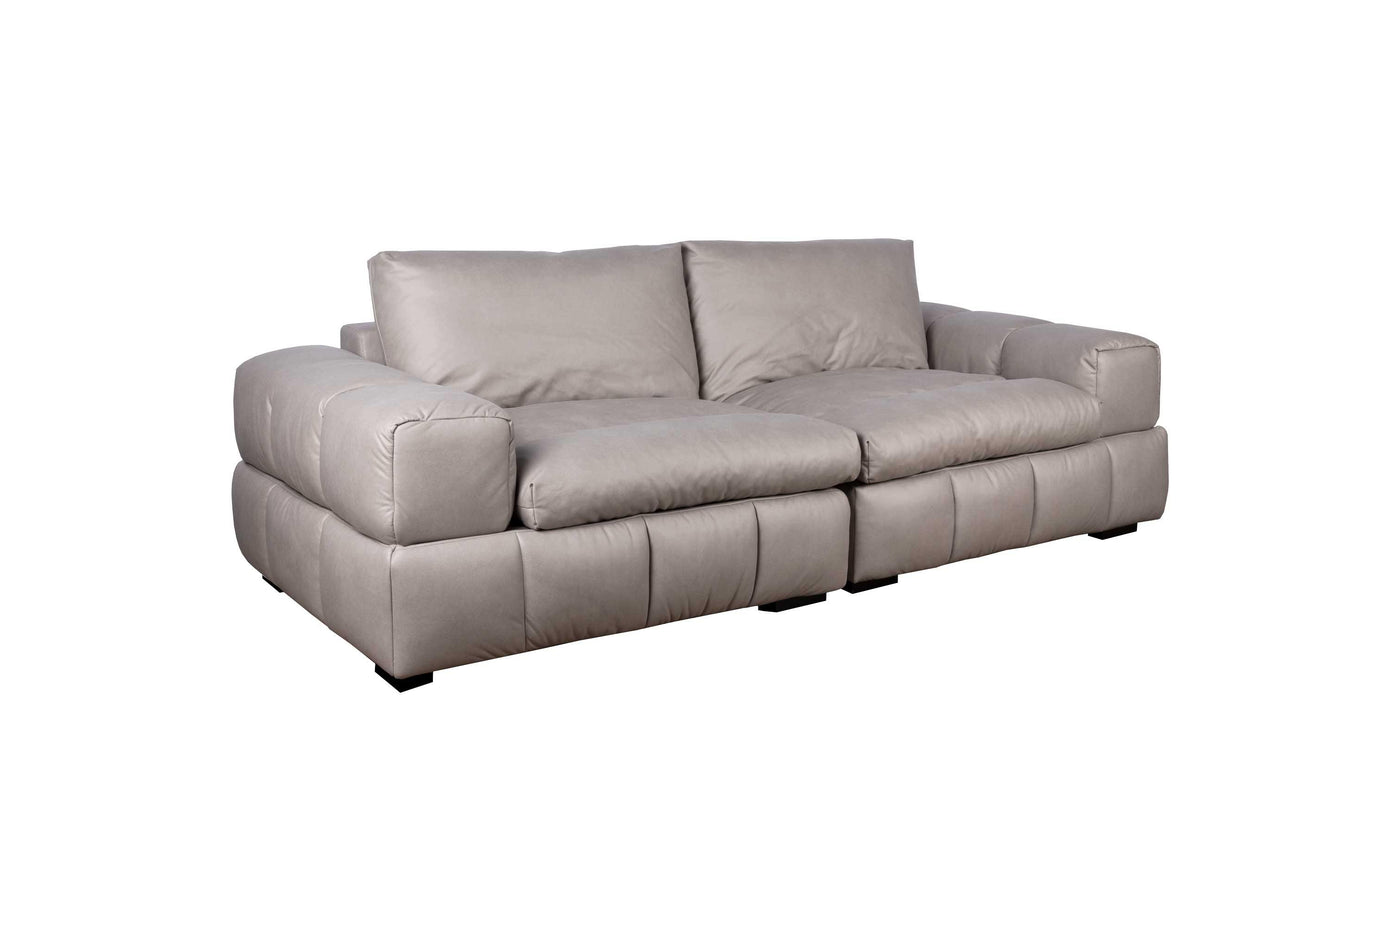 Vivian 2 Seater Sofa Hoya Casa Hoyacasa.ca couch sofa bed 4 seater sectional table kitchen table love seat sofa bed matress Toronto Canada manufactures home decoration frames indoor Ottoman sale